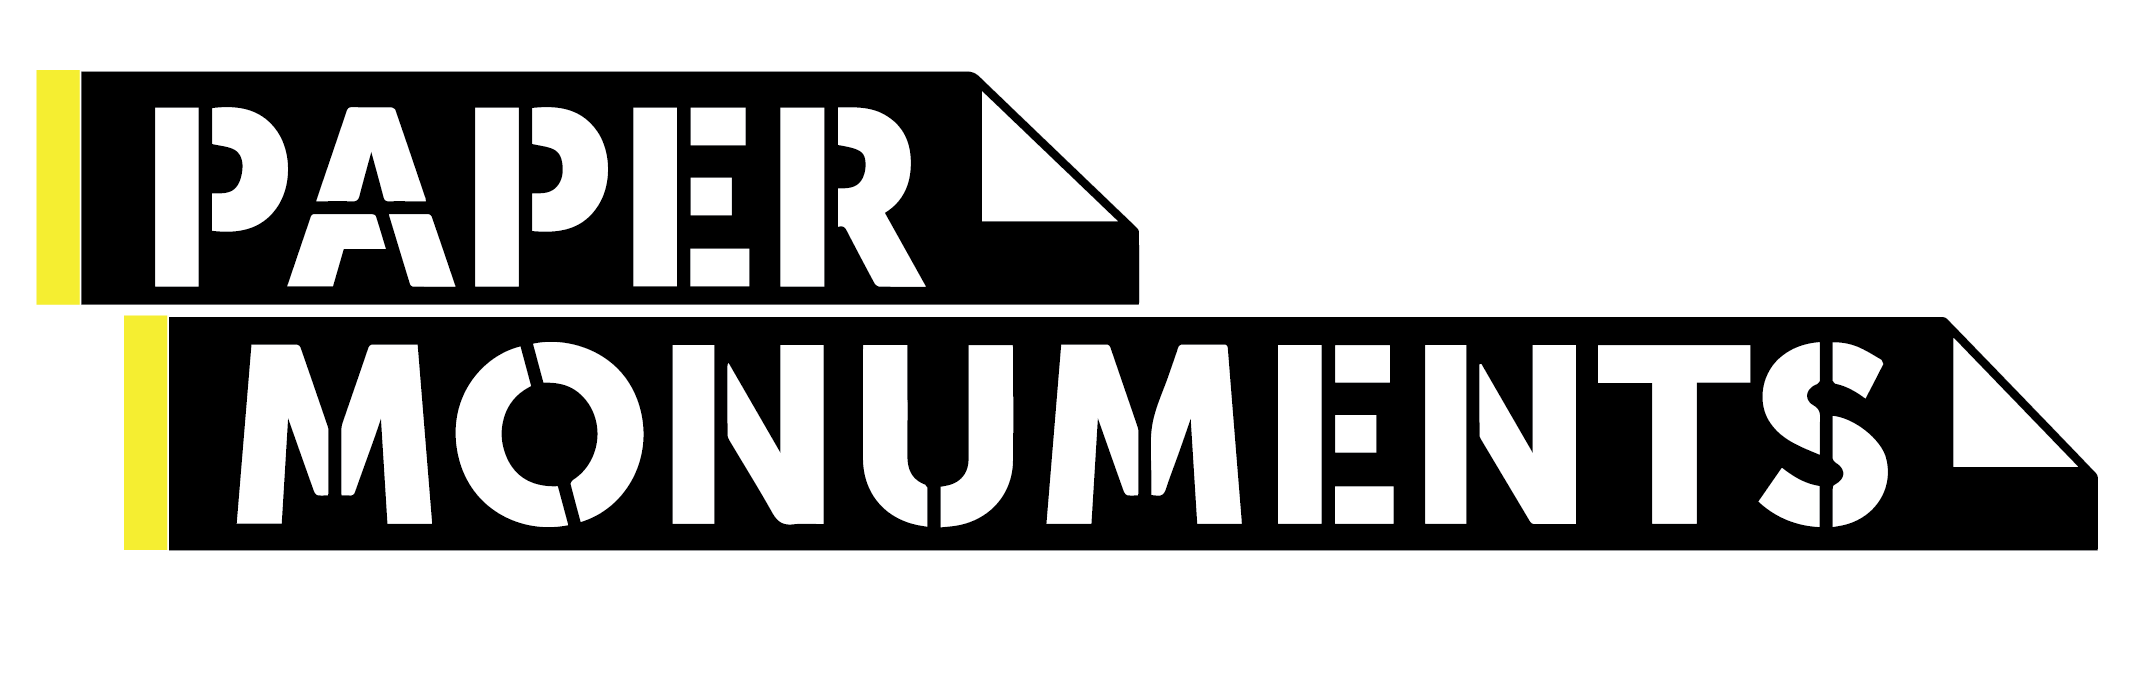 PaperMonuments01-02 (1).png